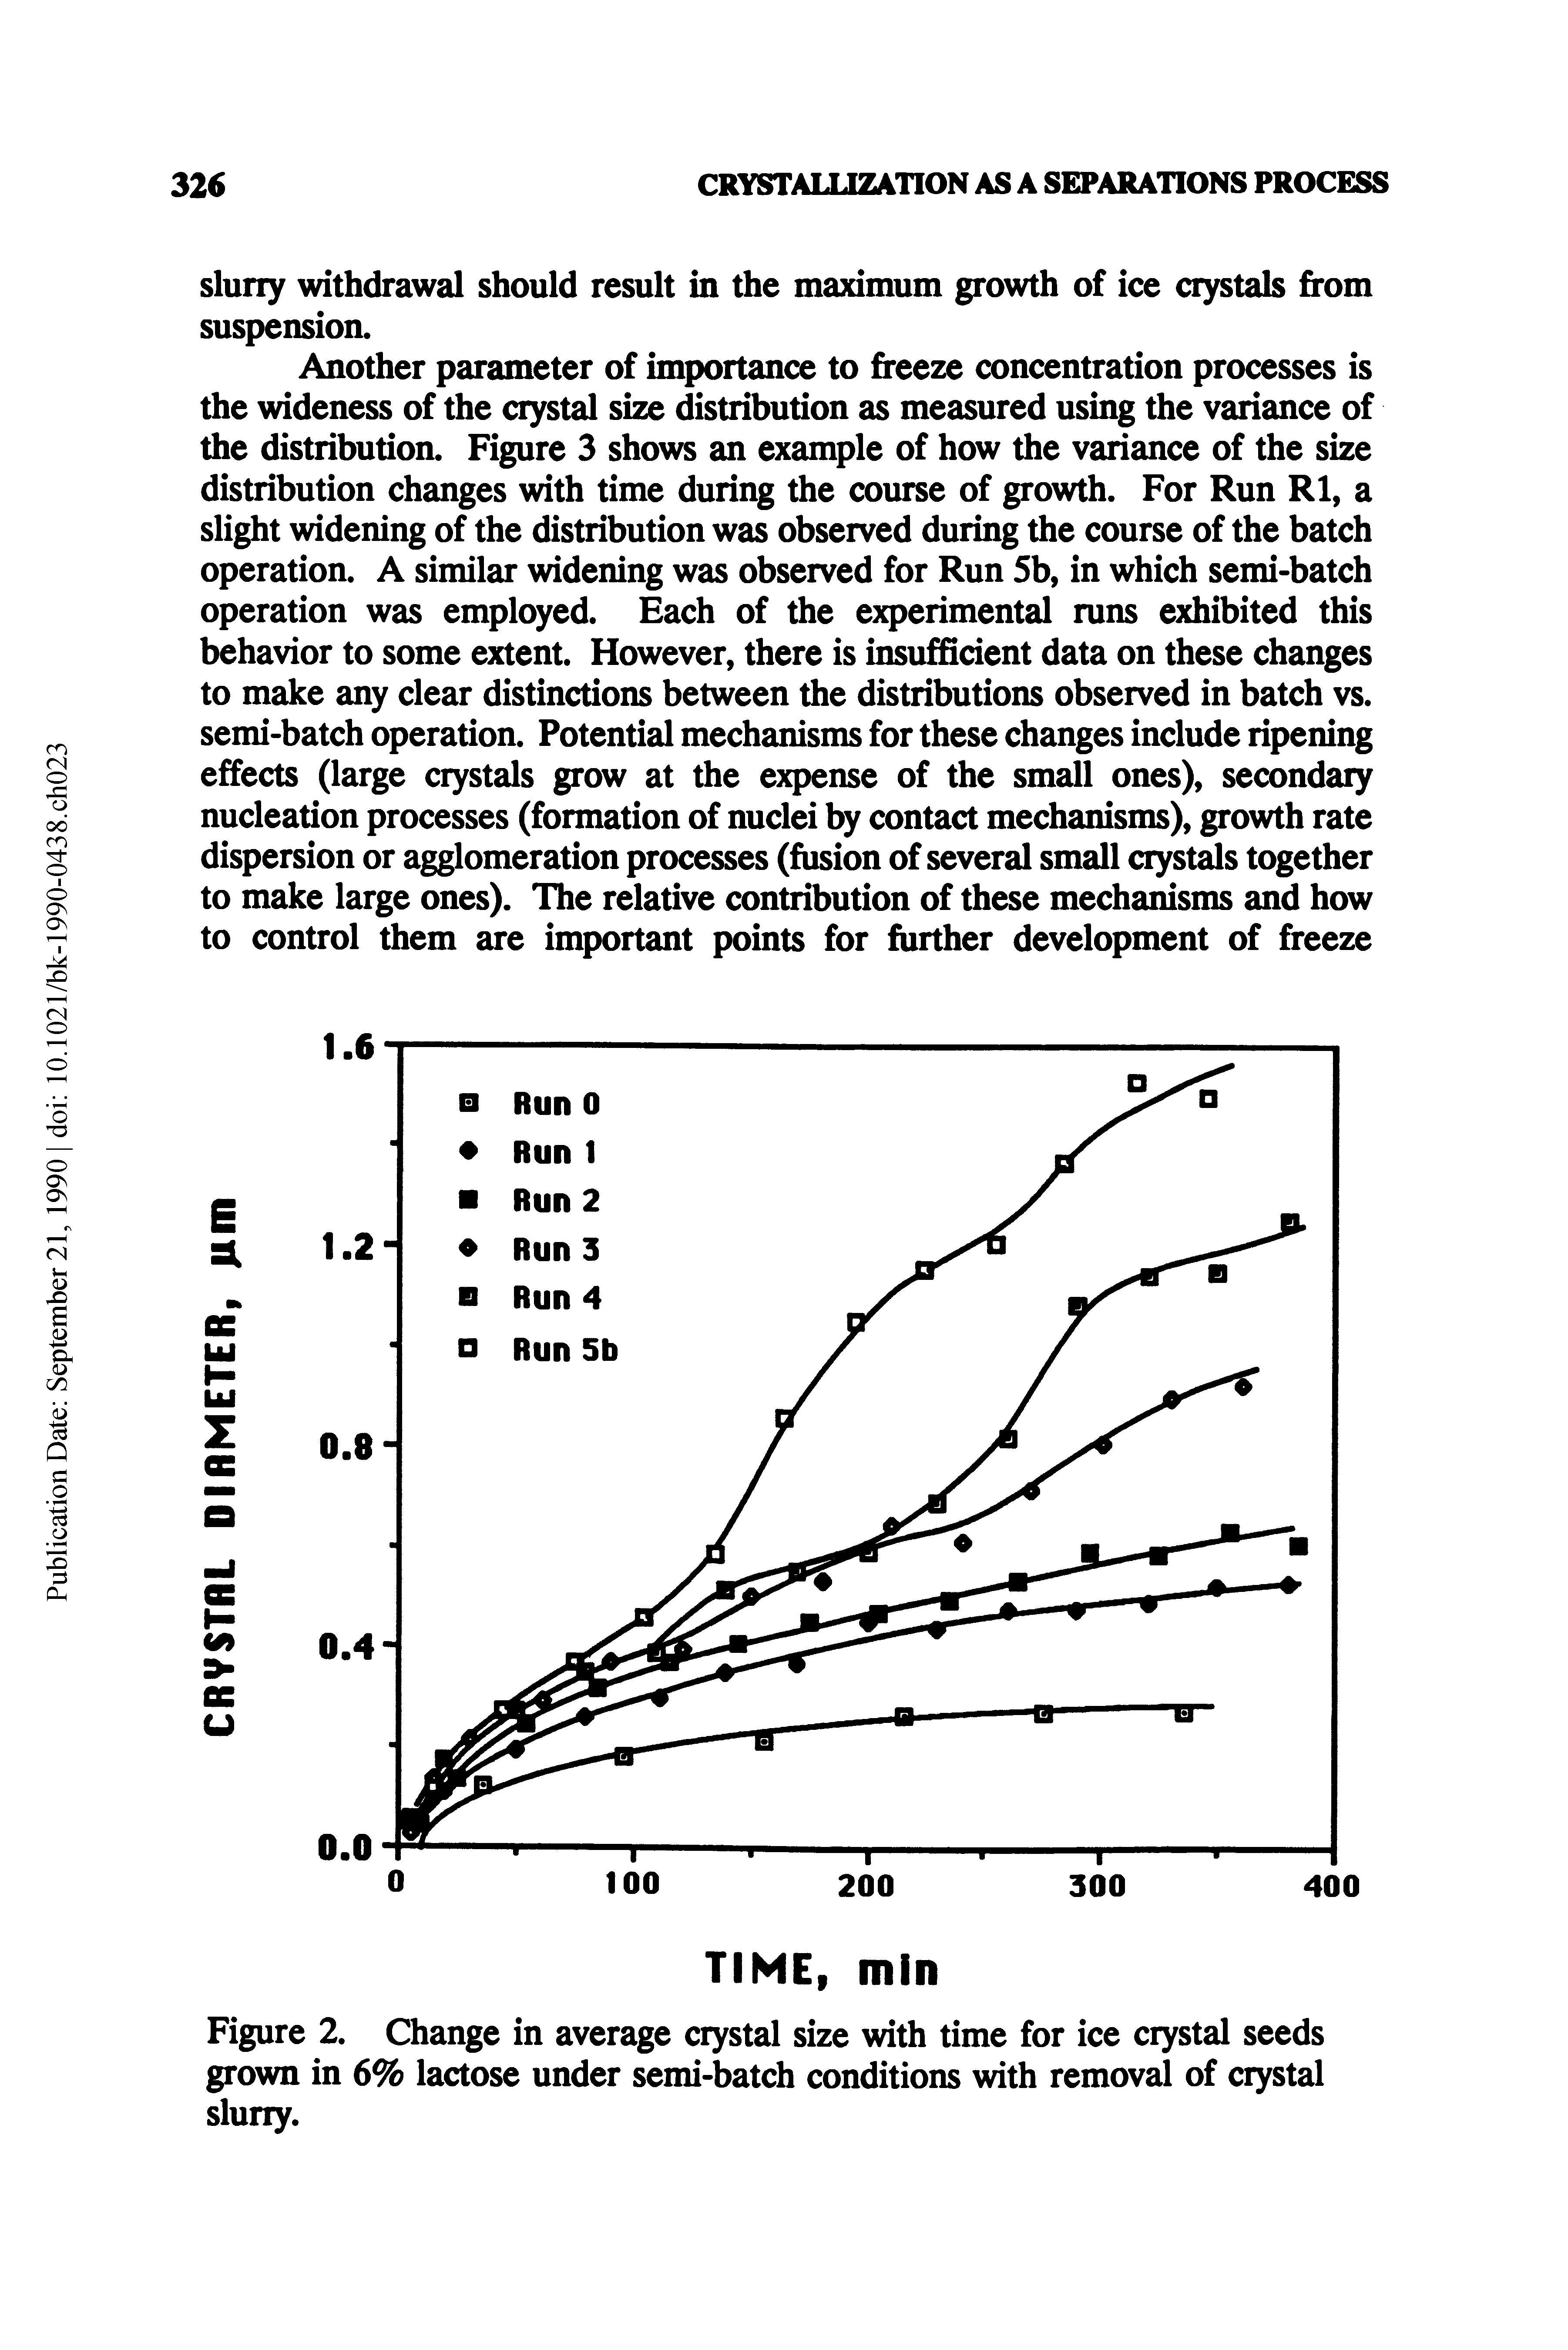 Figure 2. Change in average crystal size with time for ice ciystal seeds grown in 6% lactose under semi-batch conditions with removal of crystal slurry.